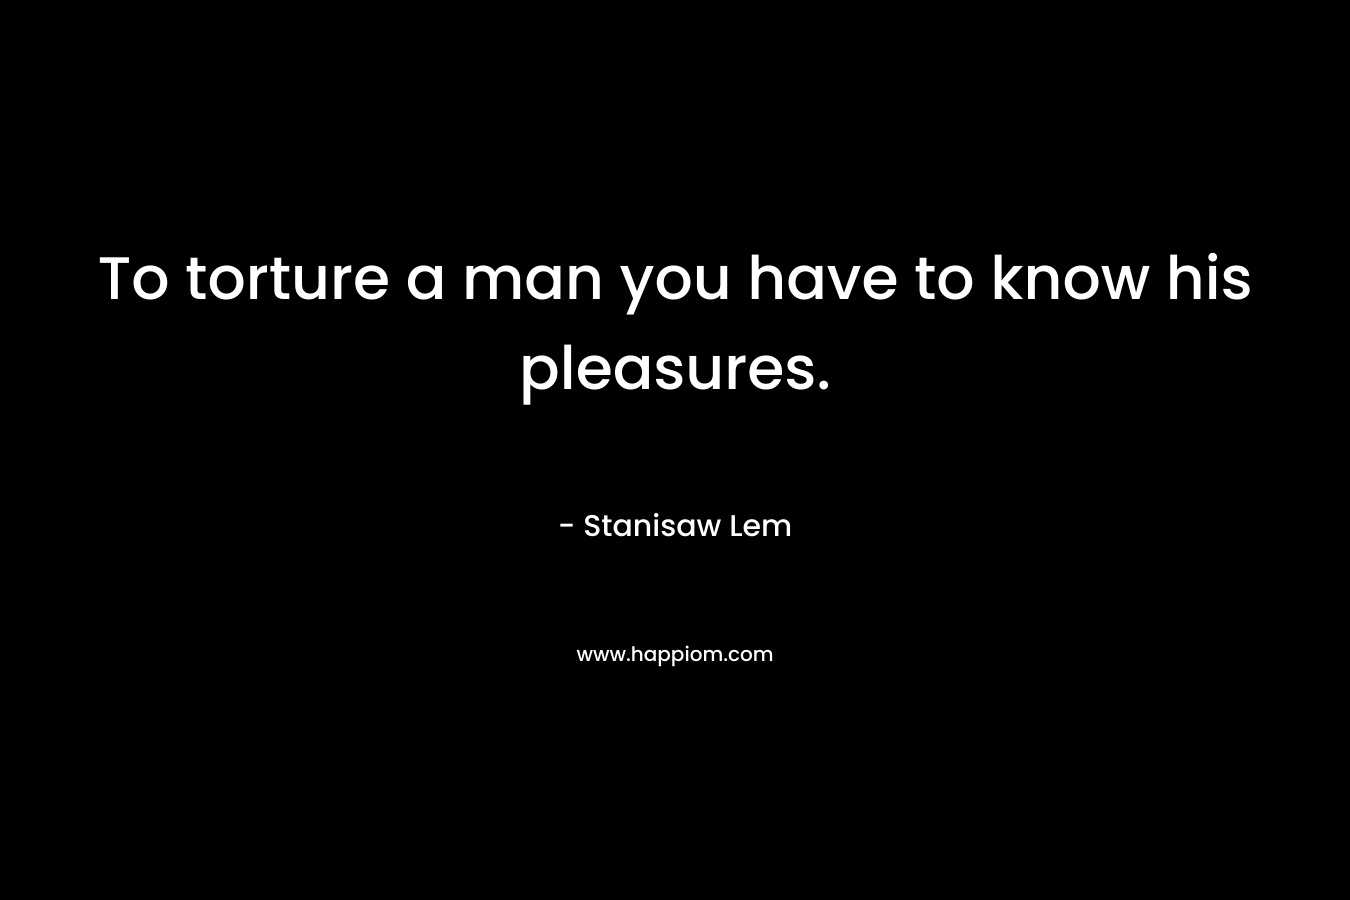 To torture a man you have to know his pleasures. – Stanisaw Lem